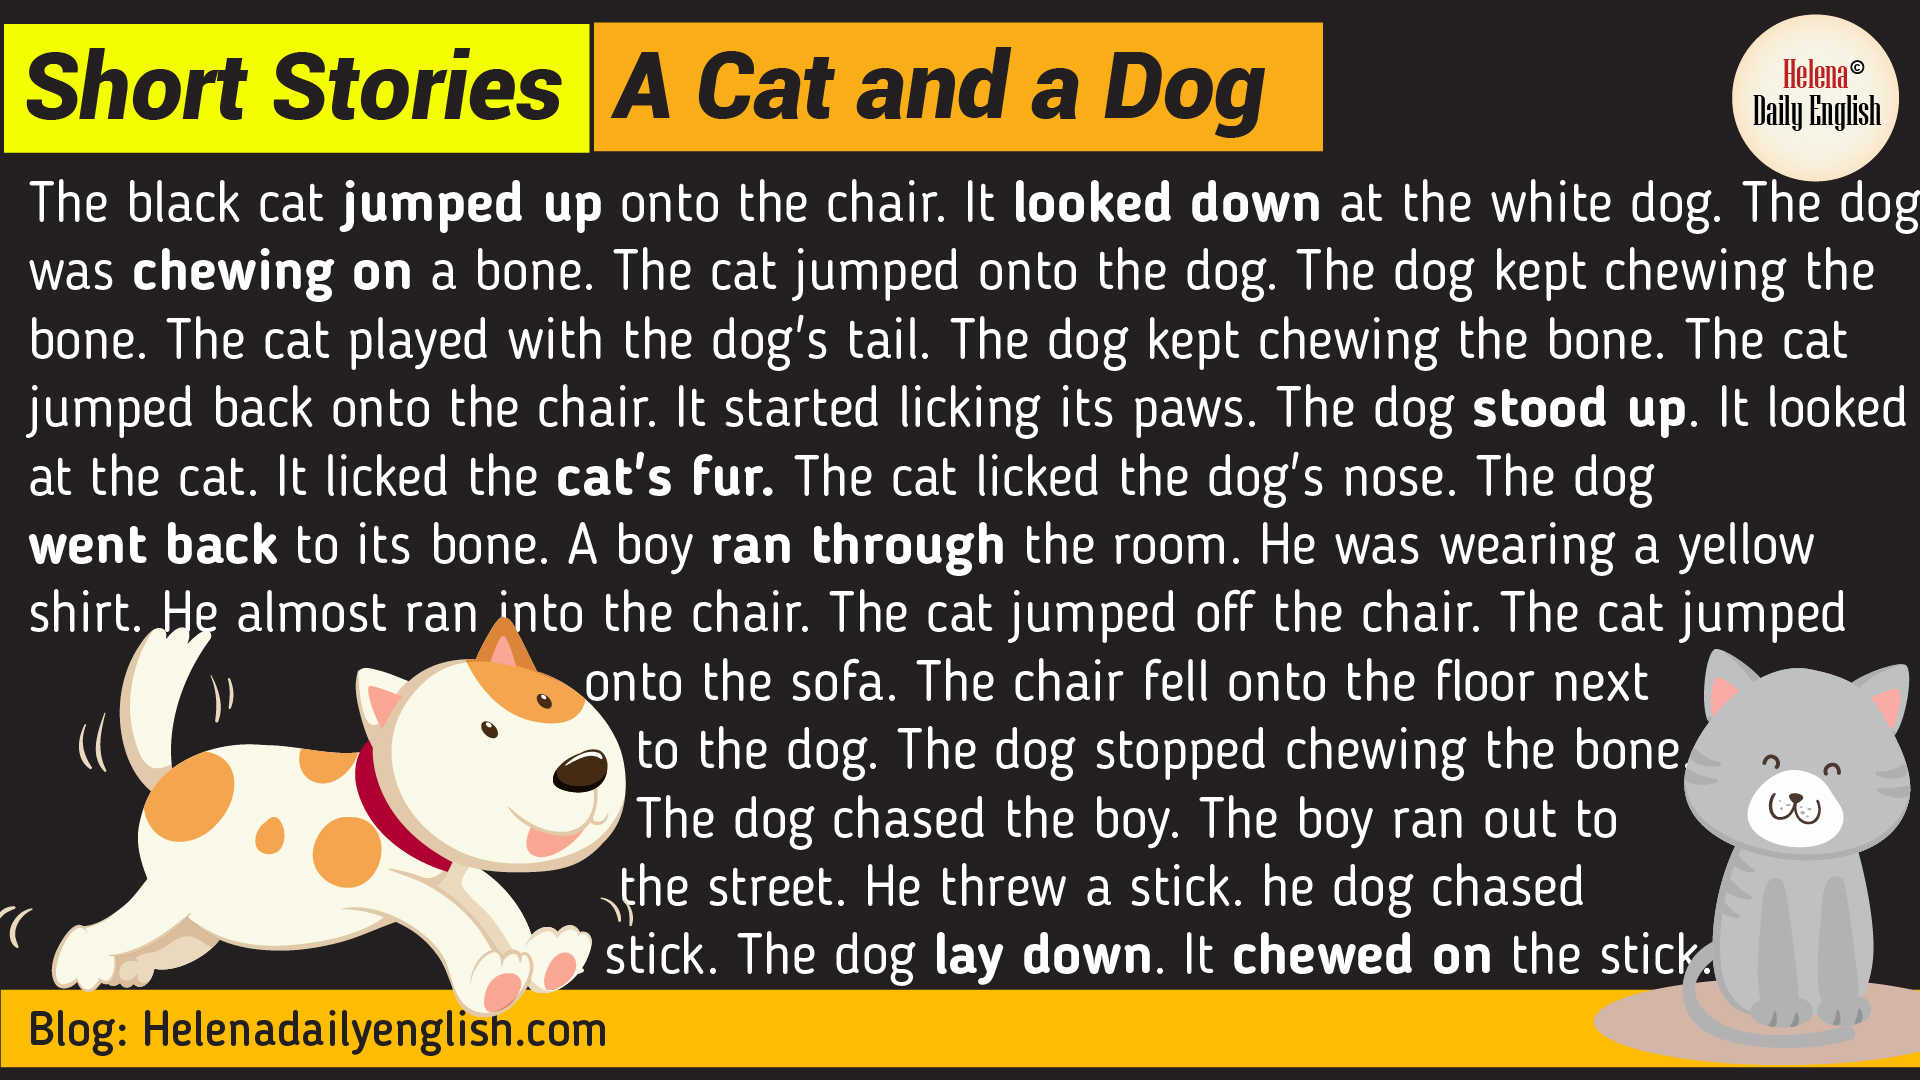 Short Stories in English: A Cat and a Dog